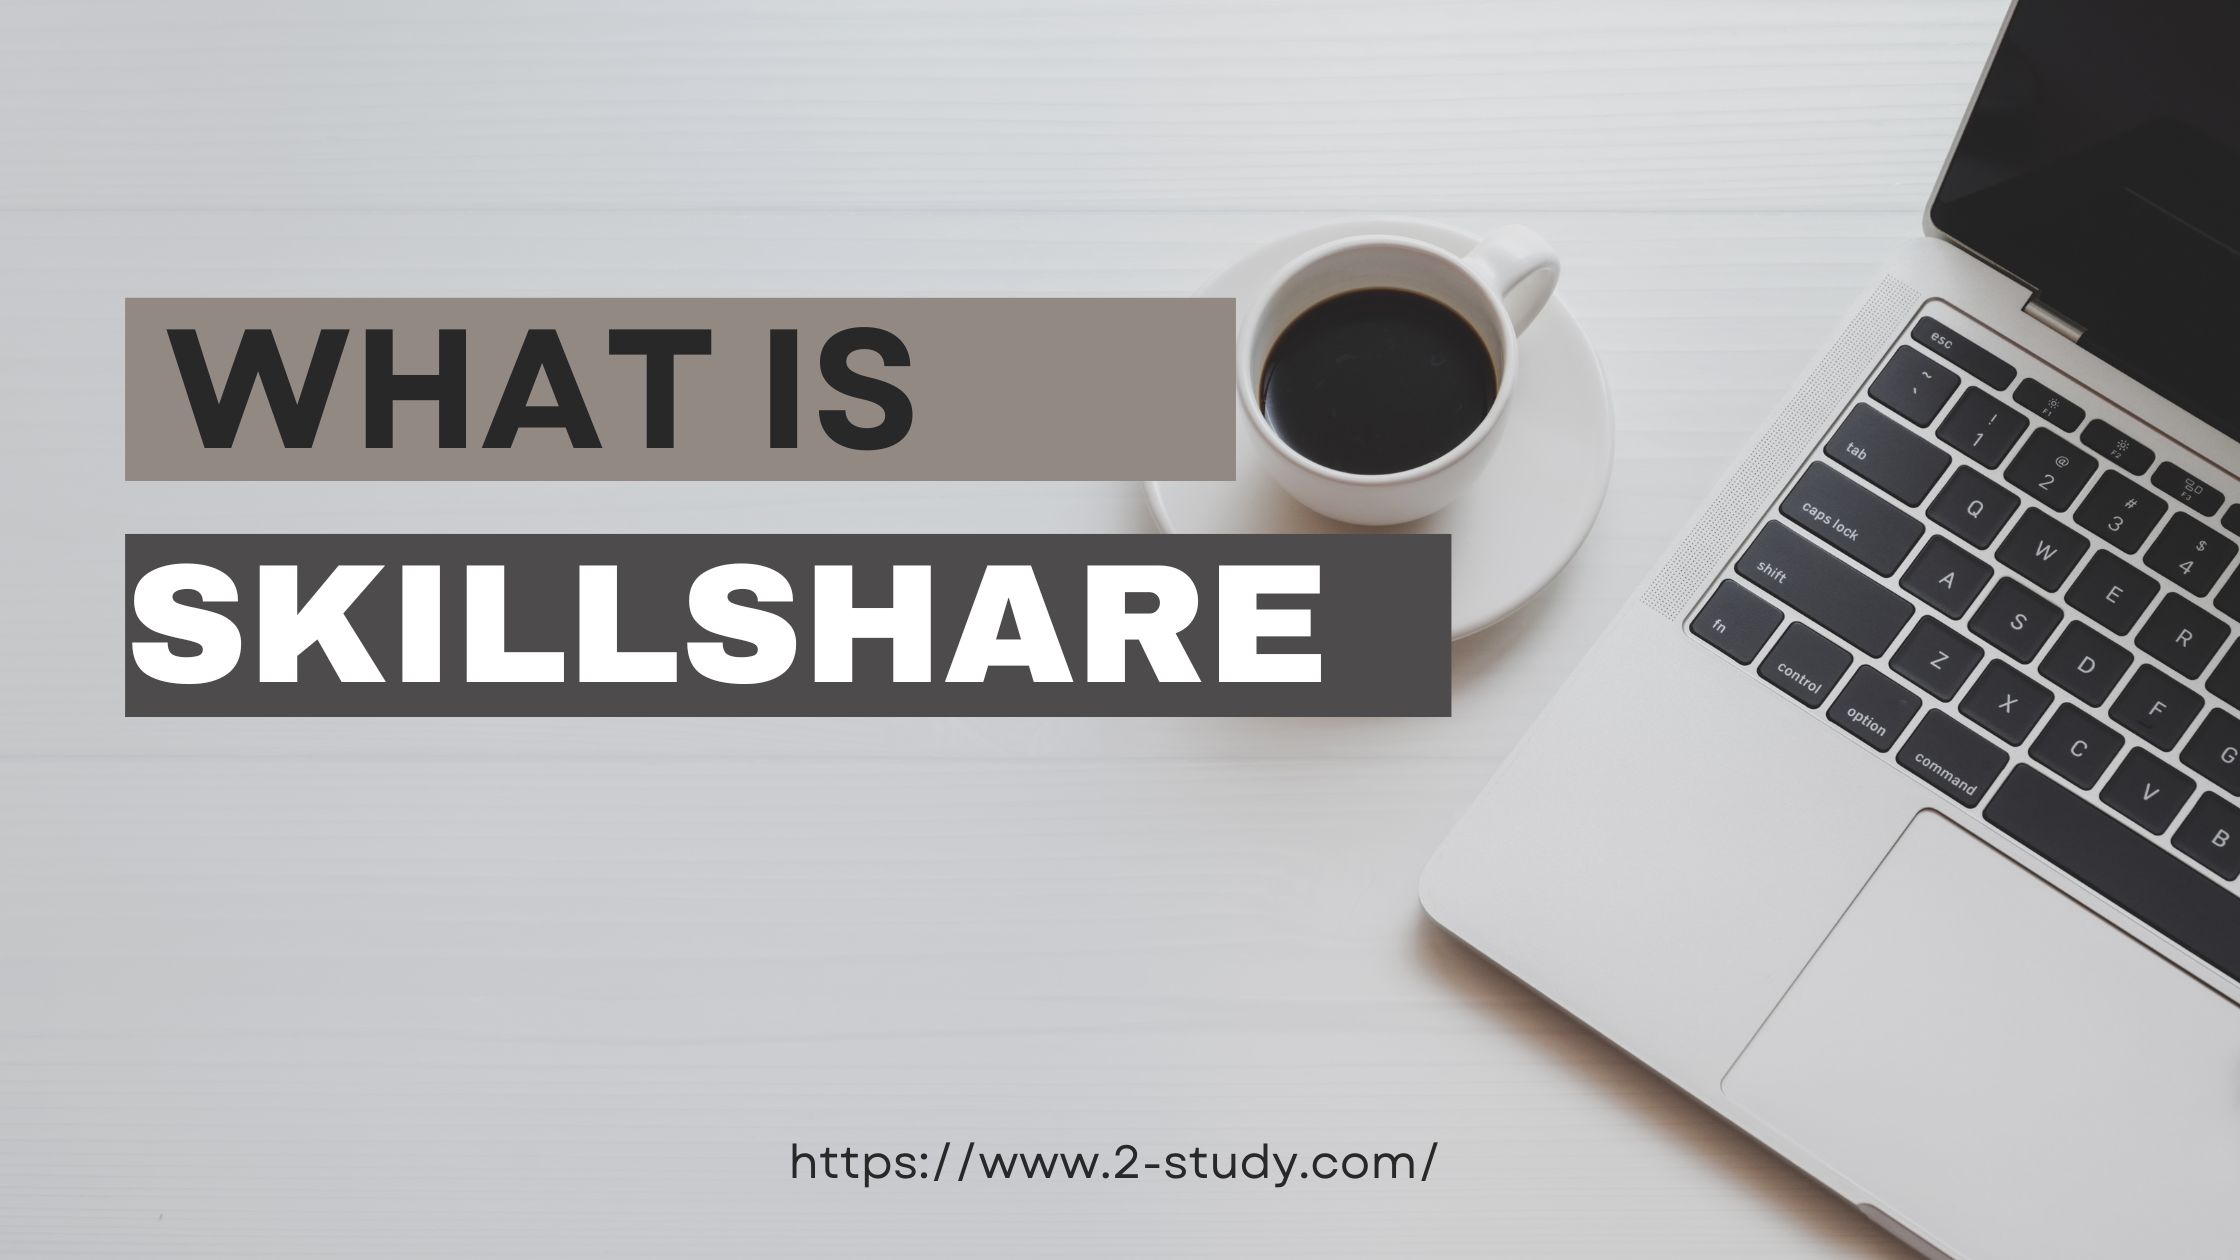 What is Skillshare: How Does It Work?